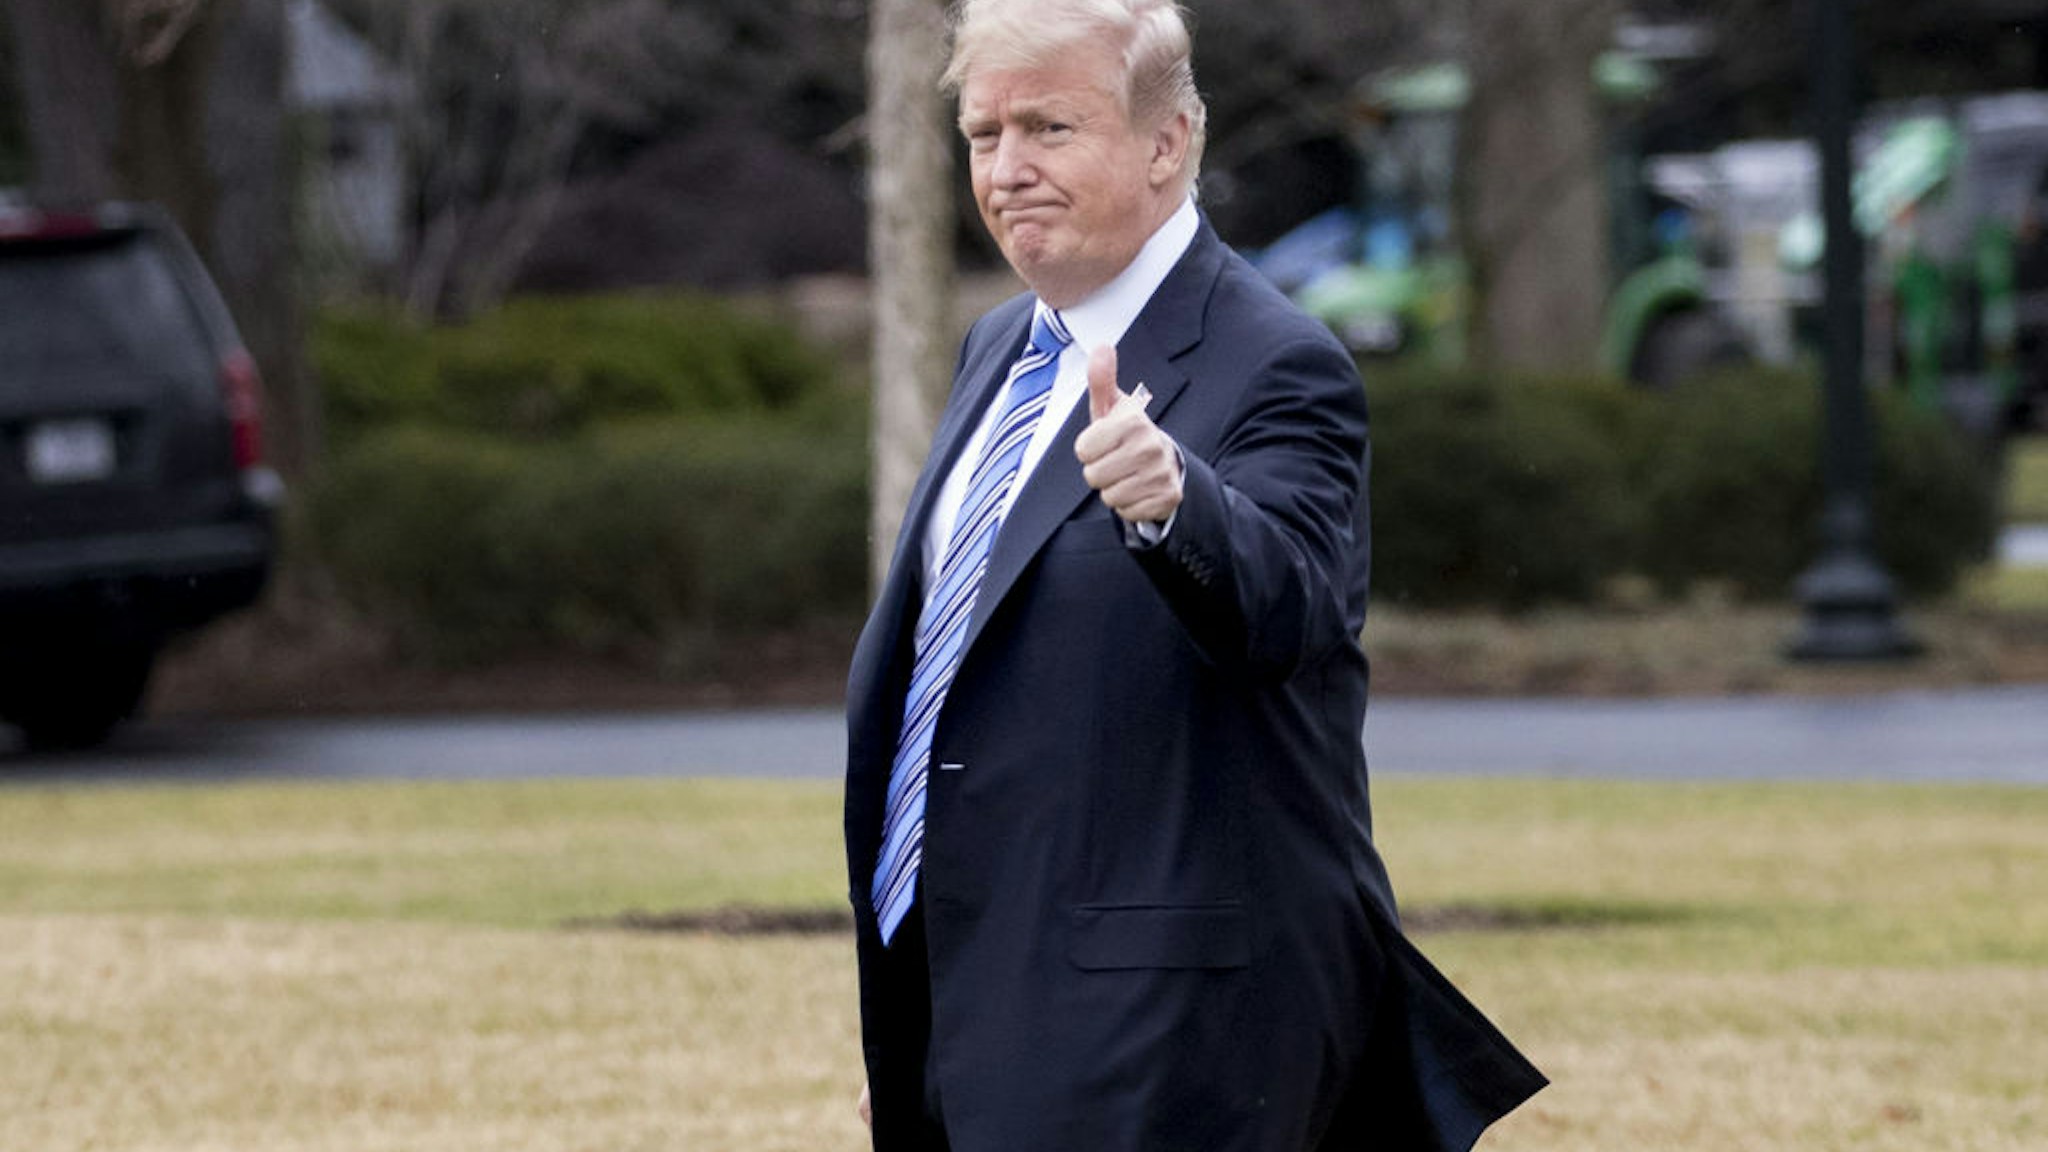 U.S. President Donald Trump gives a thumbs-up while walking on the South Lawn of the White House toward Marine One in Washington, D.C., U.S., on Friday, Feb. 16, 2018.